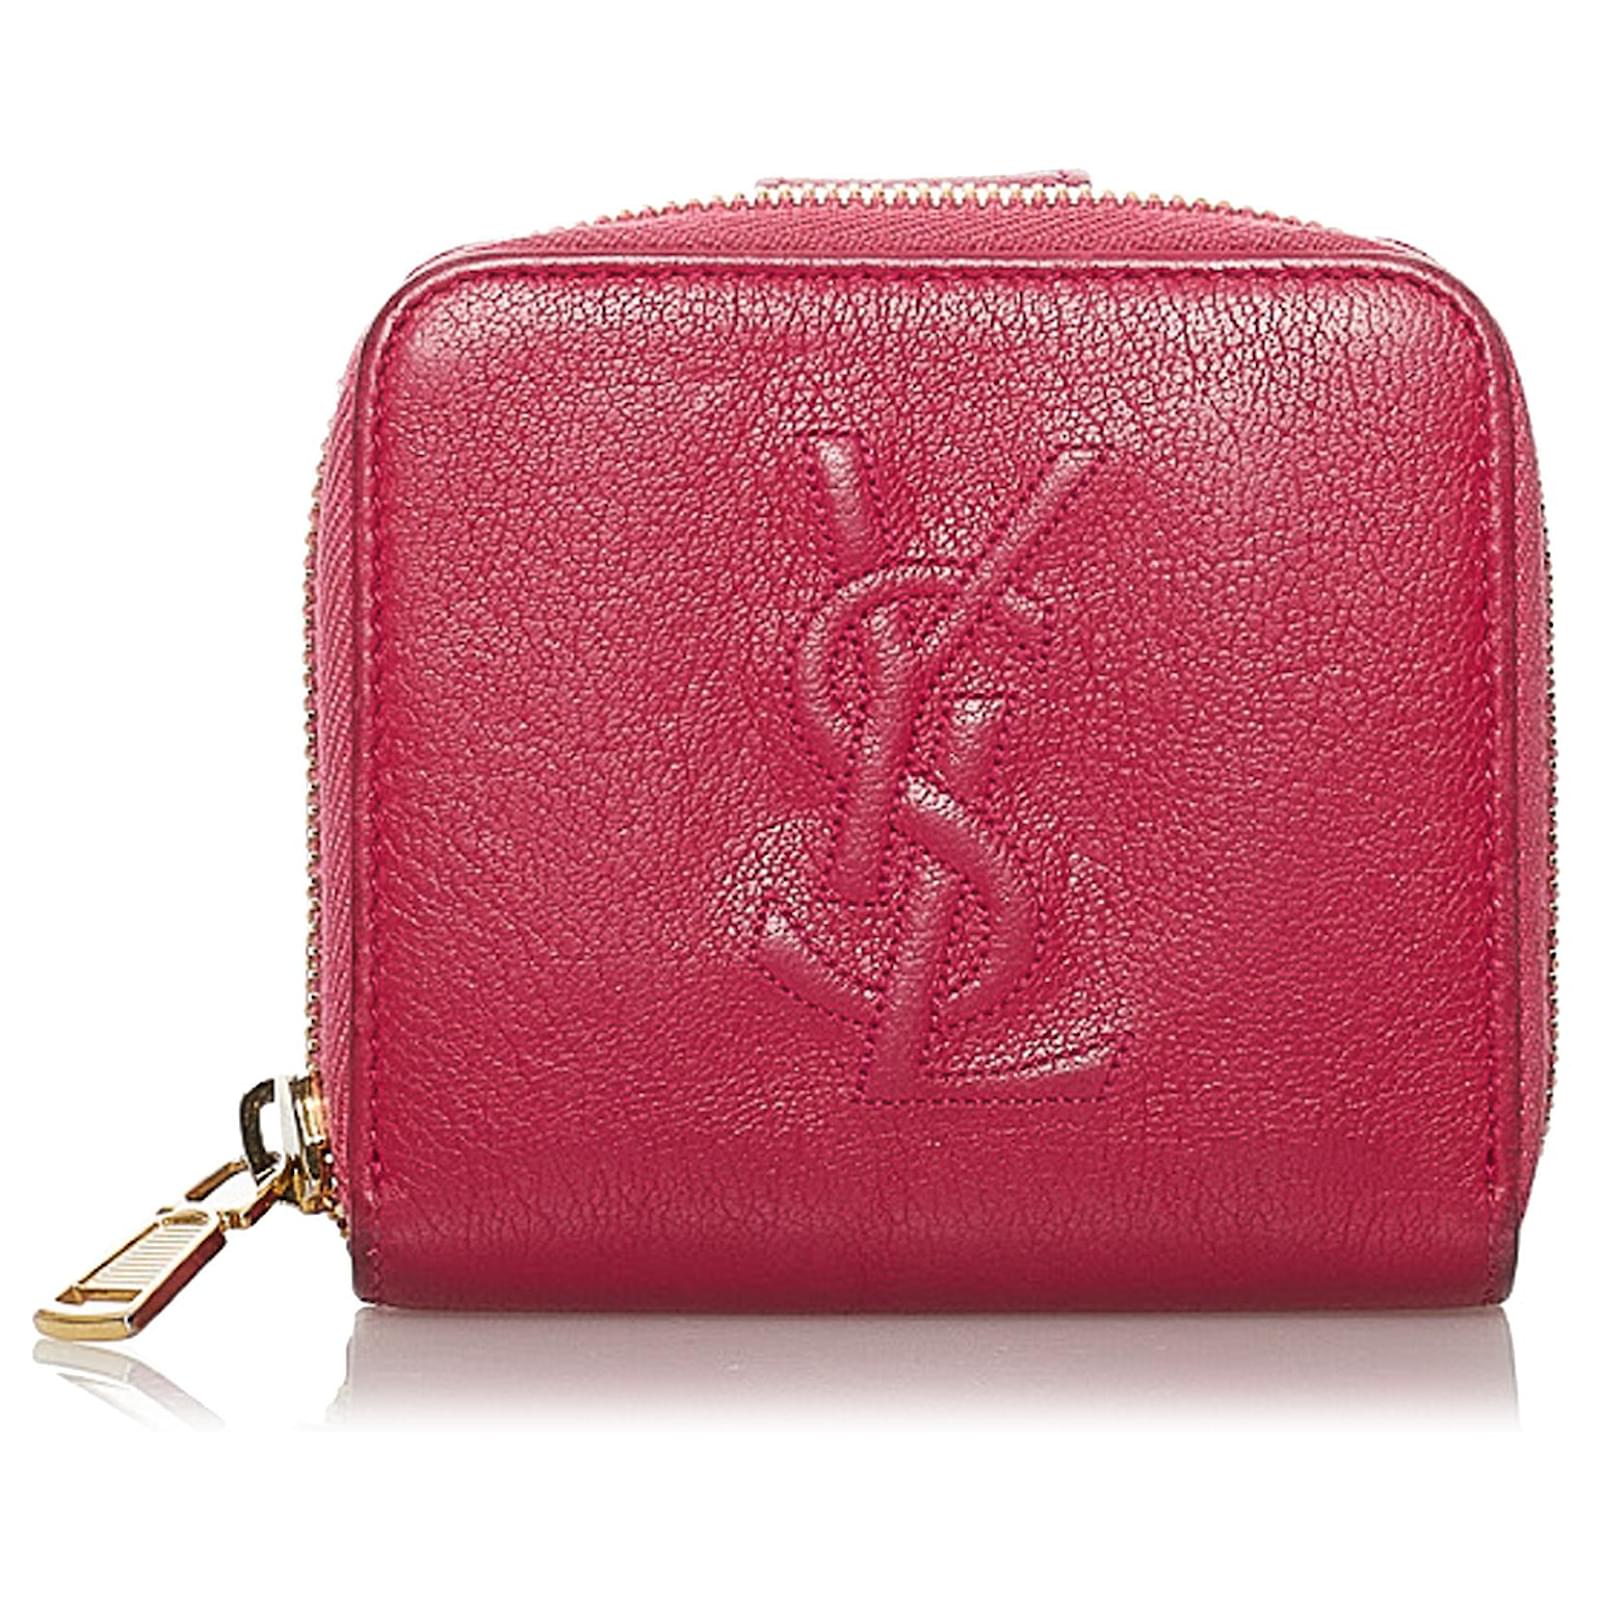 Yves Saint Laurent YSL Red cosmetic Bag Converted Pouch clutch Crossbody |  eBay